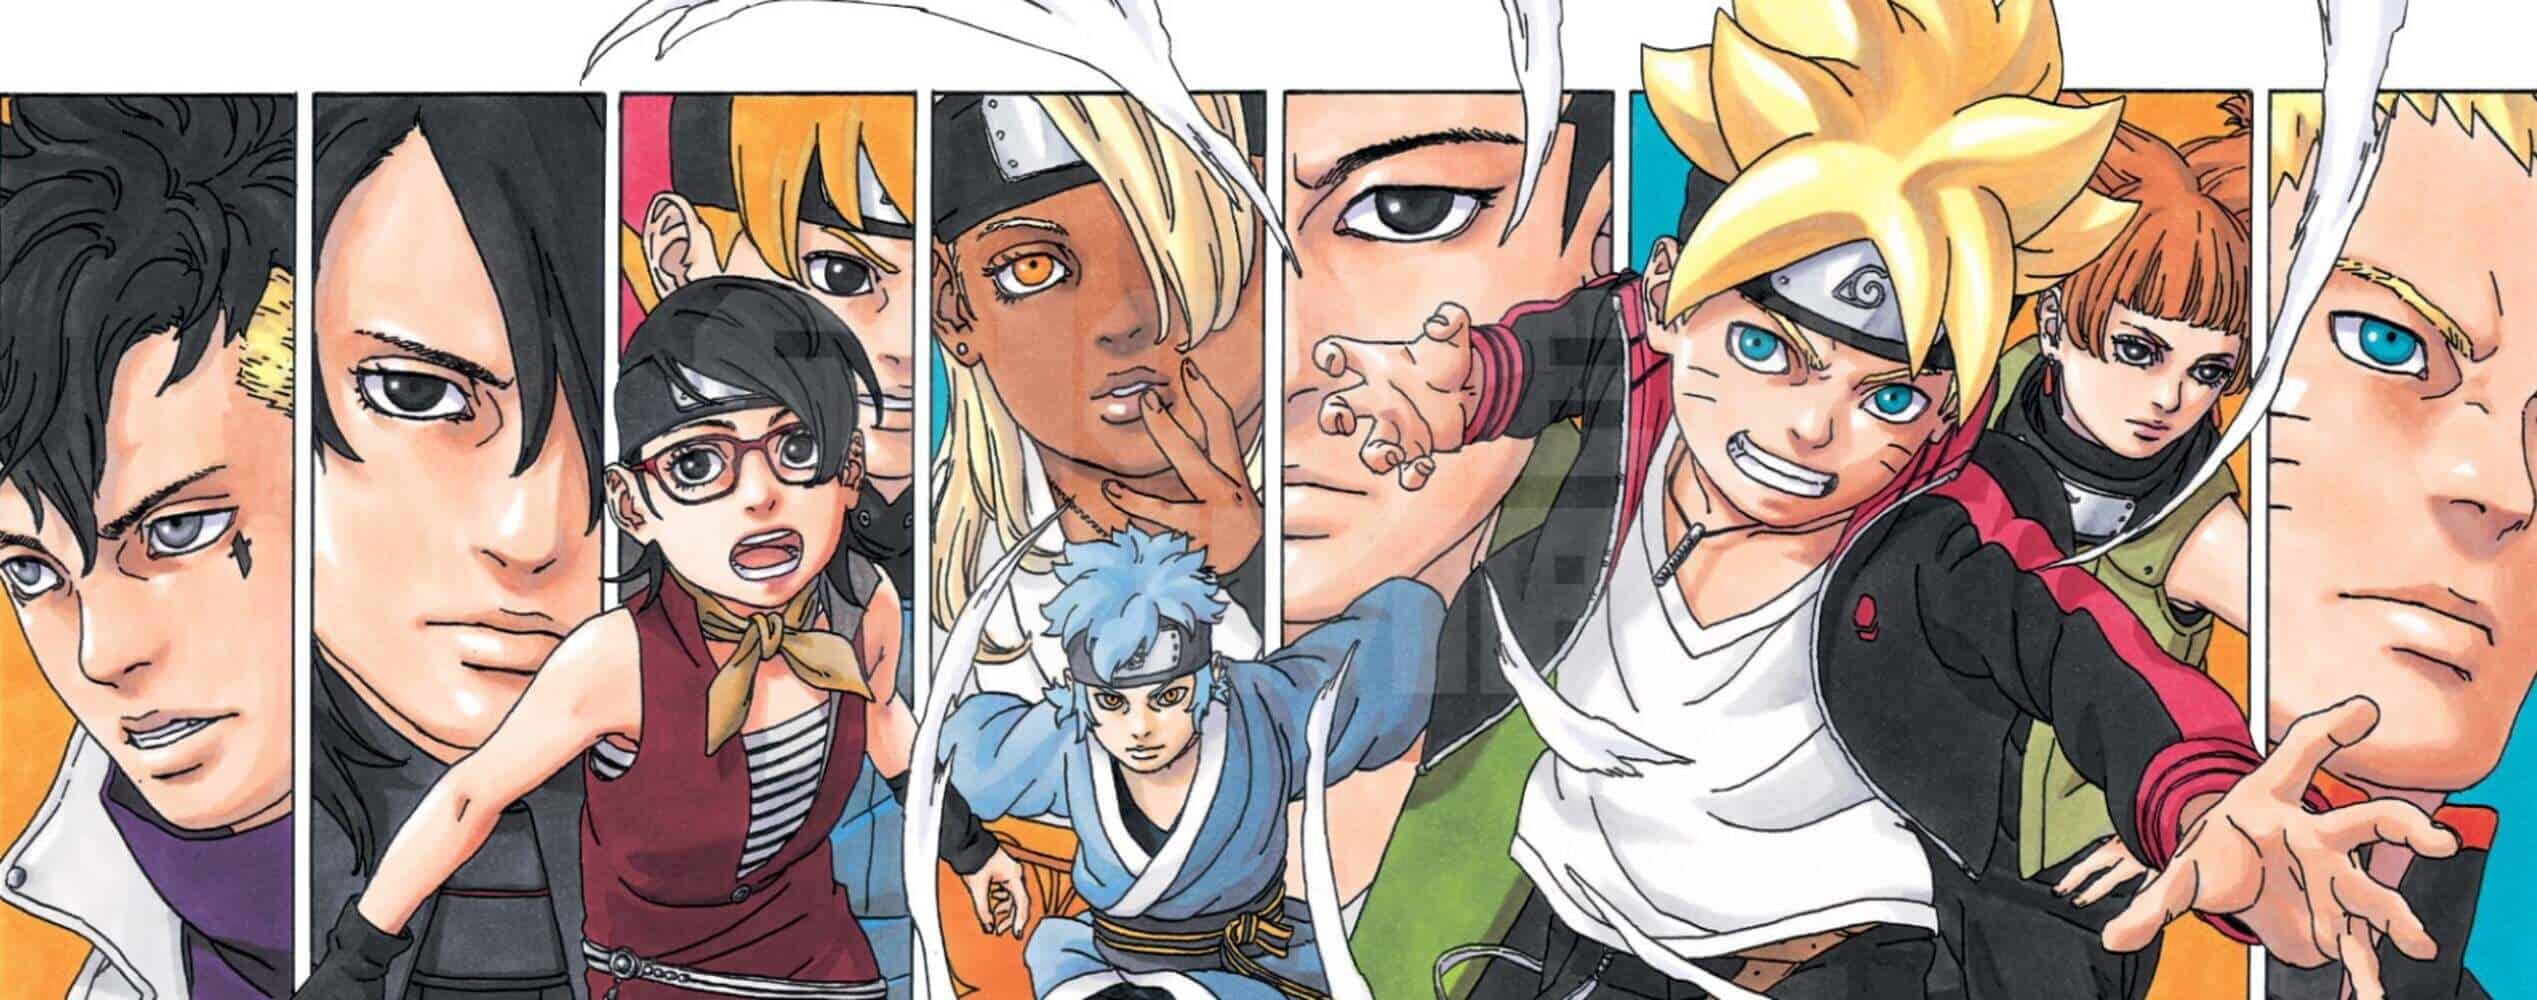 Boruto Naruto Next Generations Chapter 77 Release Date